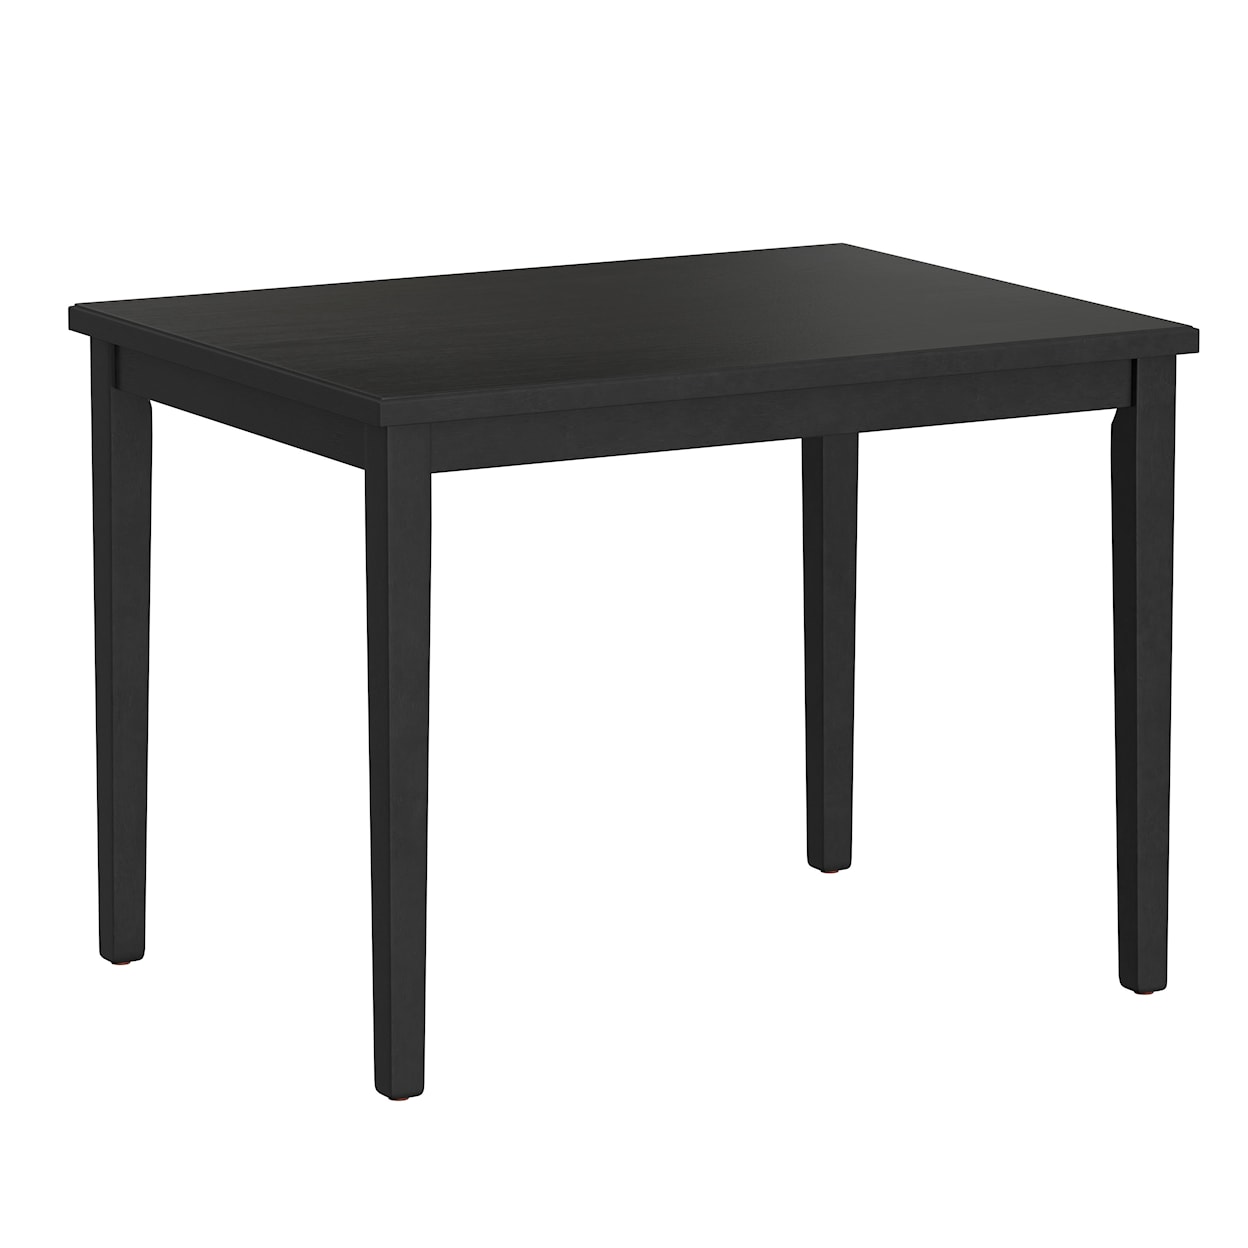 Emerald Madison Gathering Height Table